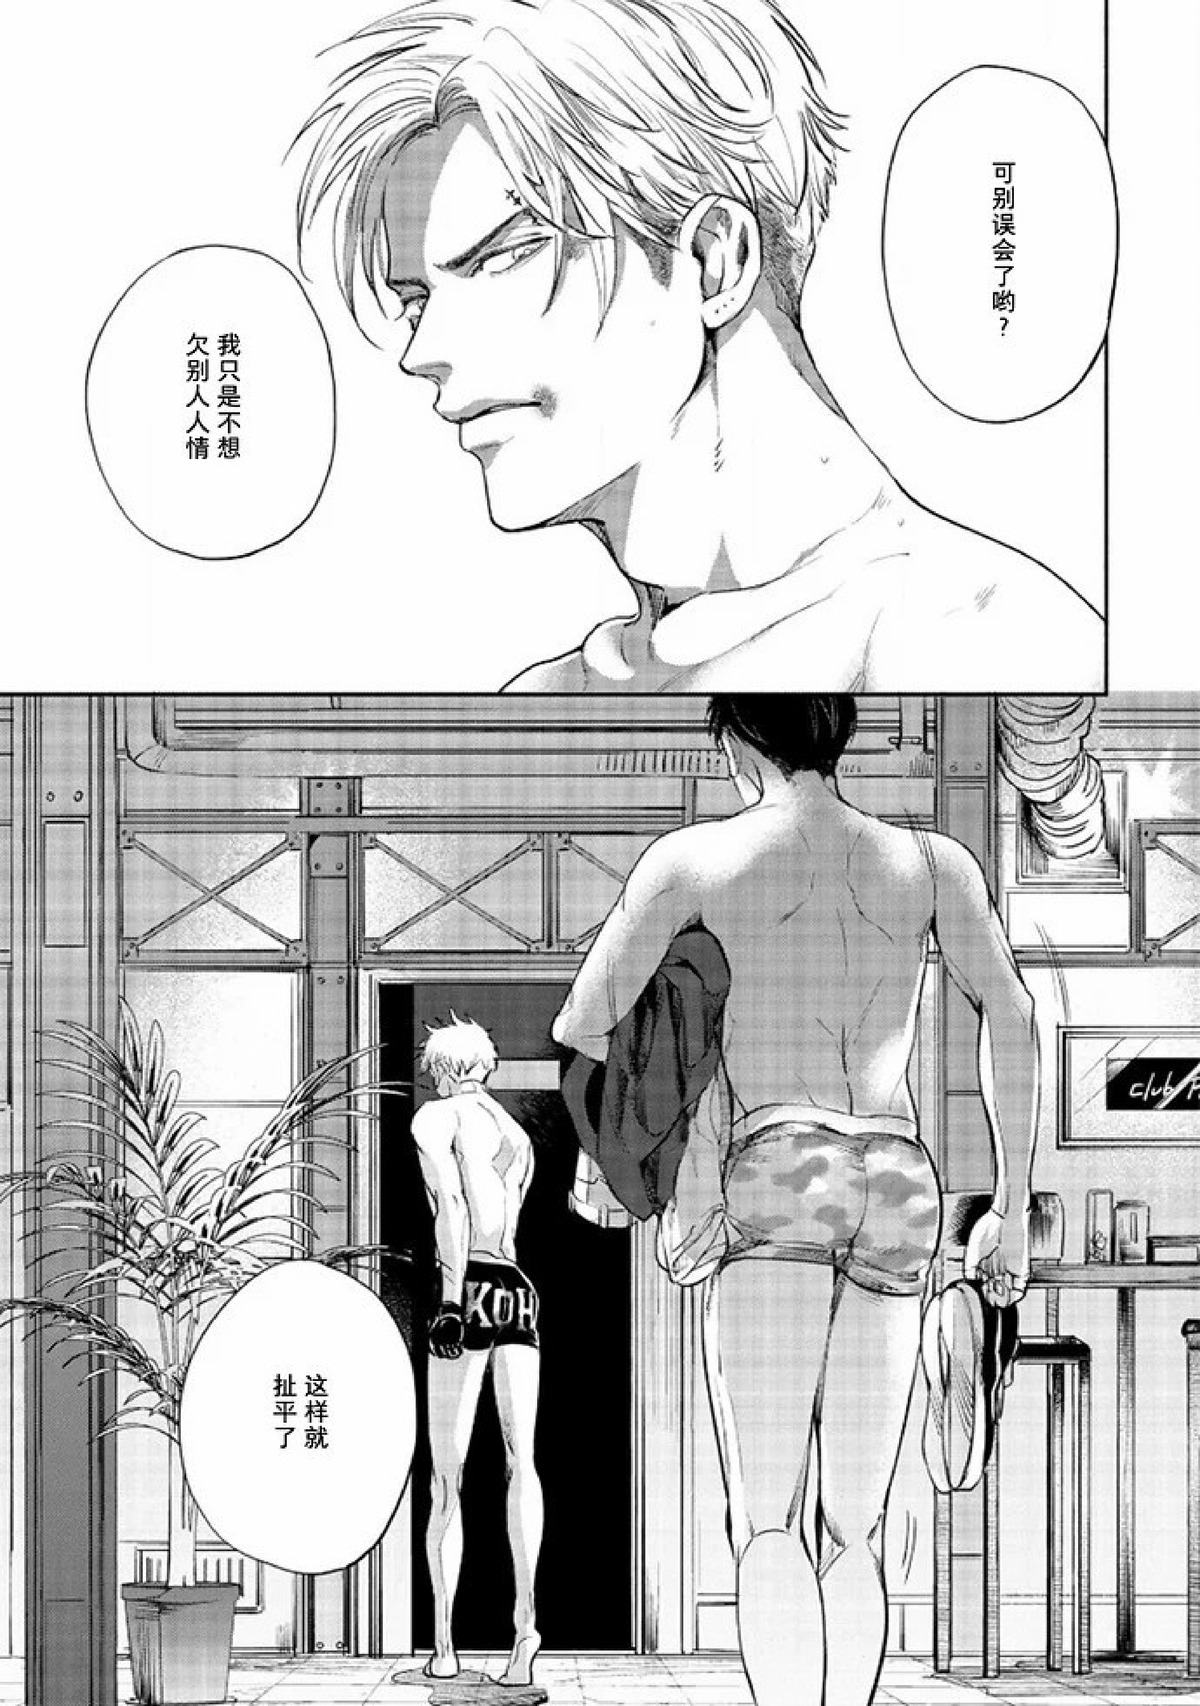 【Two sides of the same coin[腐漫]】漫画-（上卷01-02）章节漫画下拉式图片-73.jpg